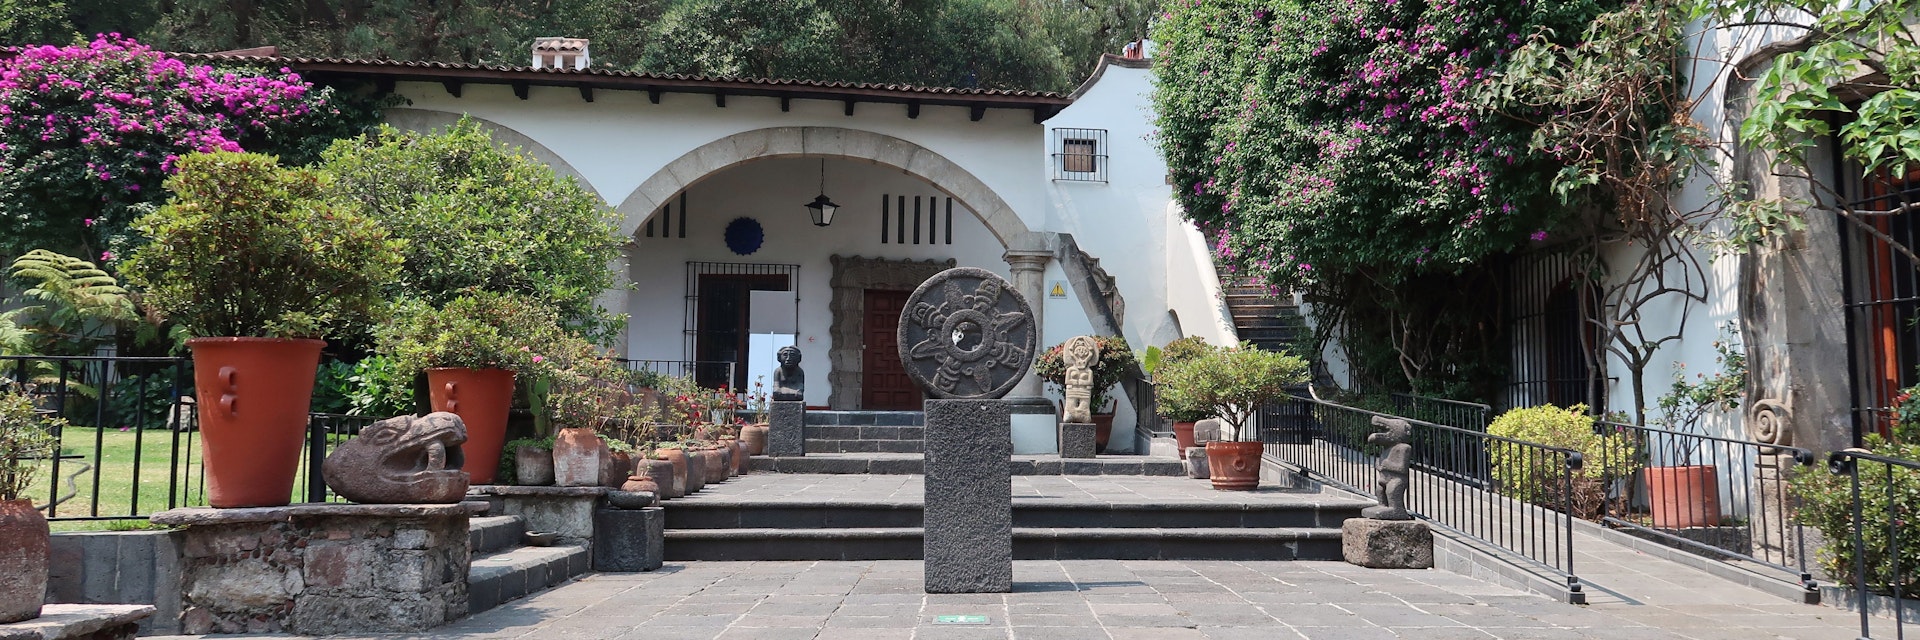 MEXICO CITY, MEXICO - May 15, 2019: Pictures taken at Dolores Olmedo Museum.
Possibly the most important Diego Rivera collection of all belongs to this museum, ensconced in a peaceful 17th-century hacienda. Dolores Olmedo, a socialite and patron of Rivera, resided here until her death in 2002.